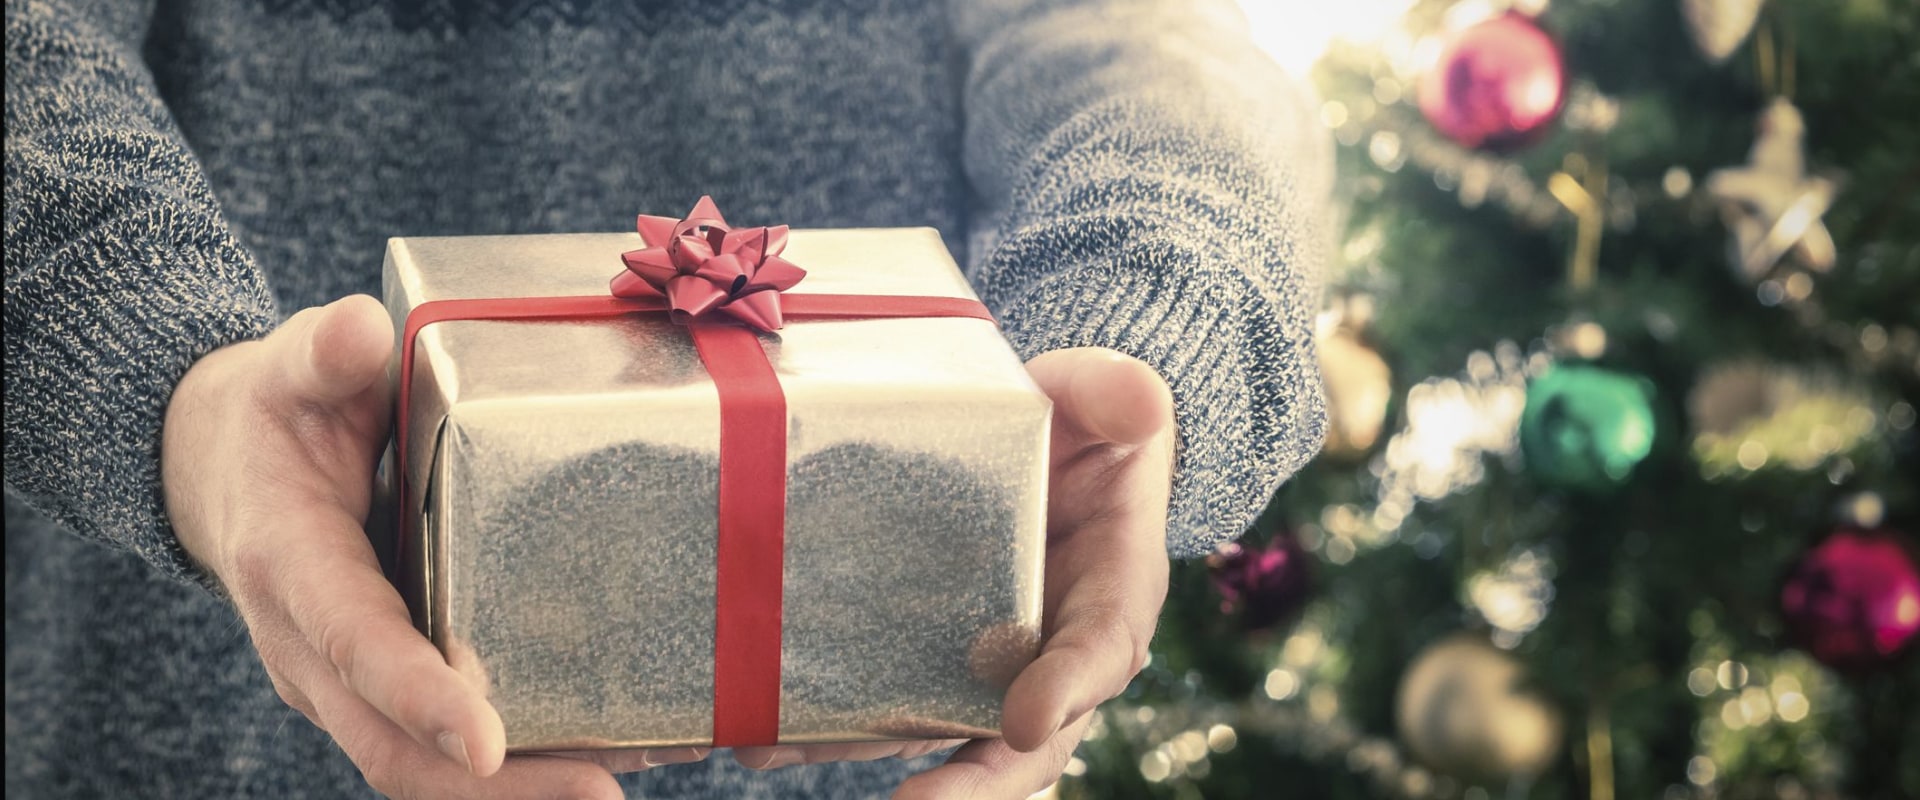 Why christmas gifts?